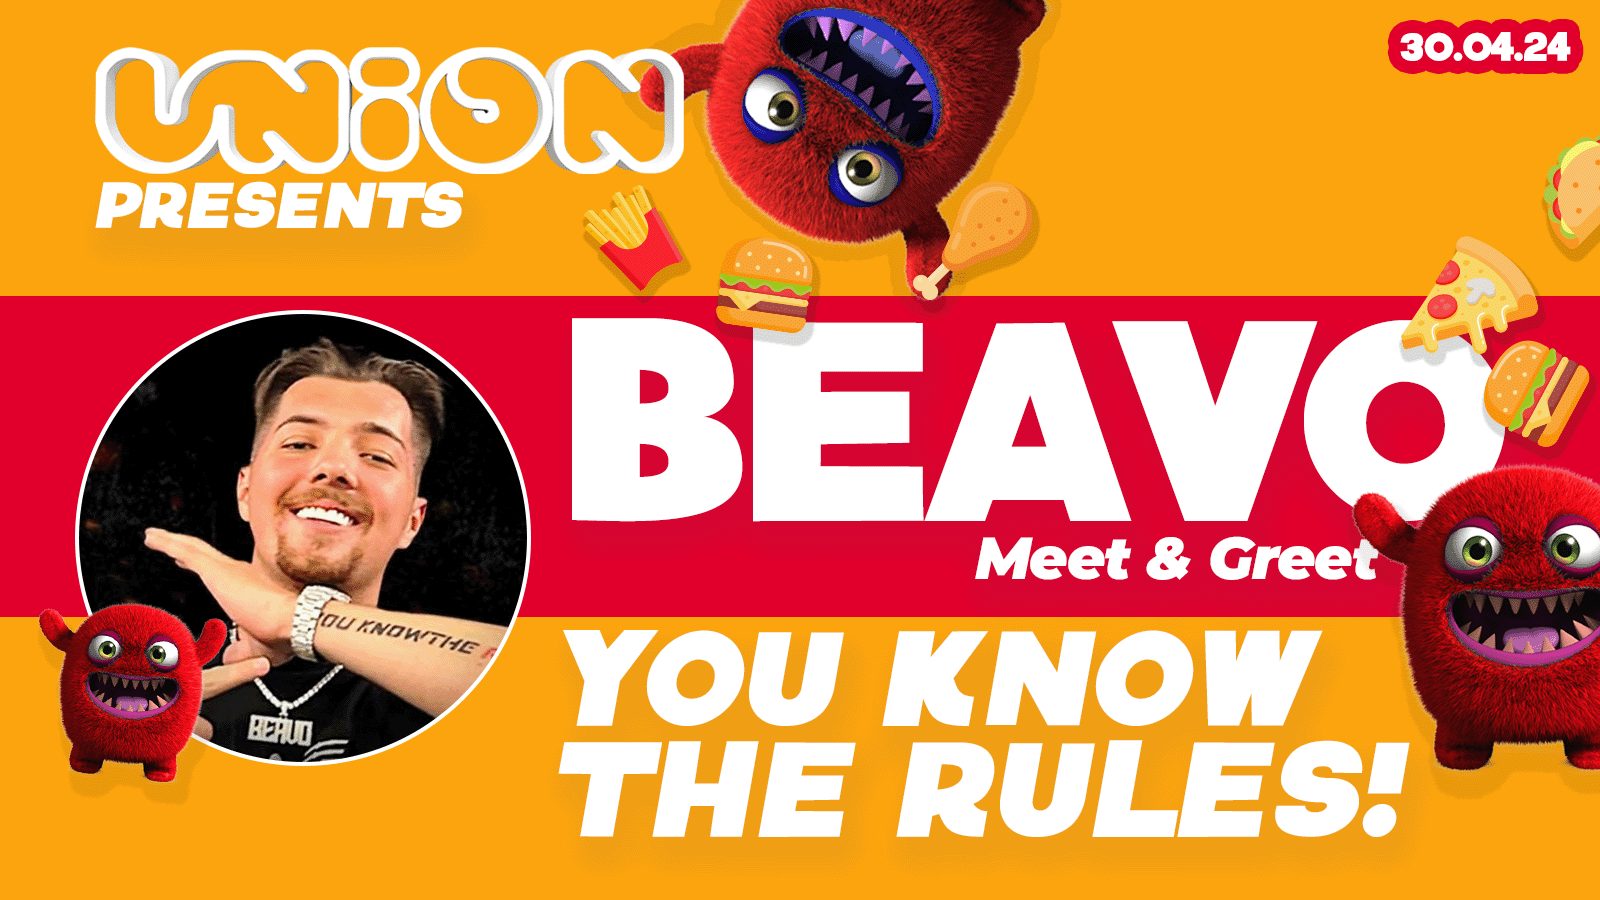 UNION TUESDAY’S // YOU KNOW THE RULES FT BEAVO 🔥